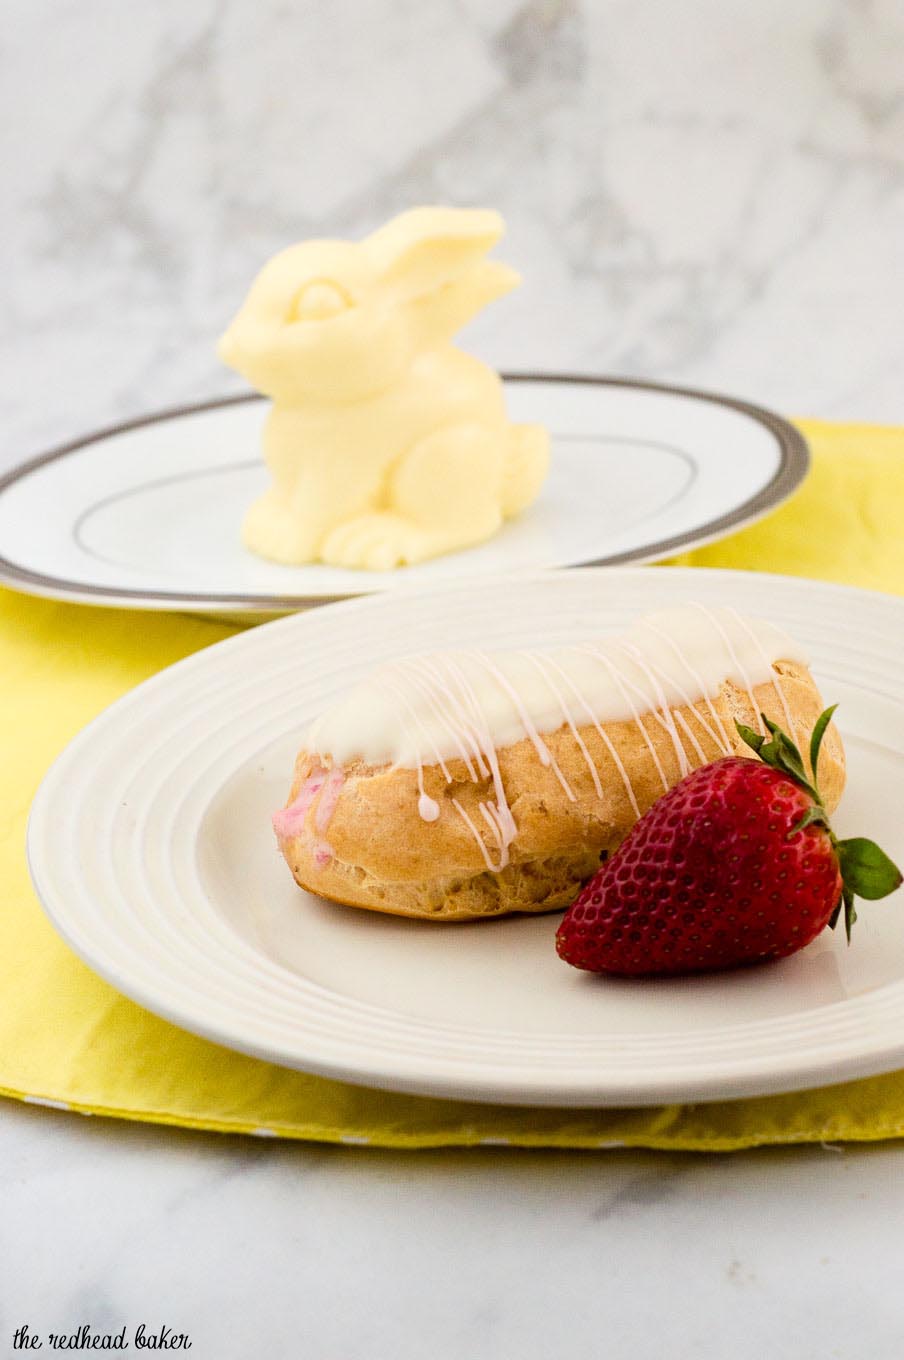 Hop into spring with strawberry-lemon eclairs, filled with fruit-flavored pastry cream then dipped in white chocolate ganache. #ad